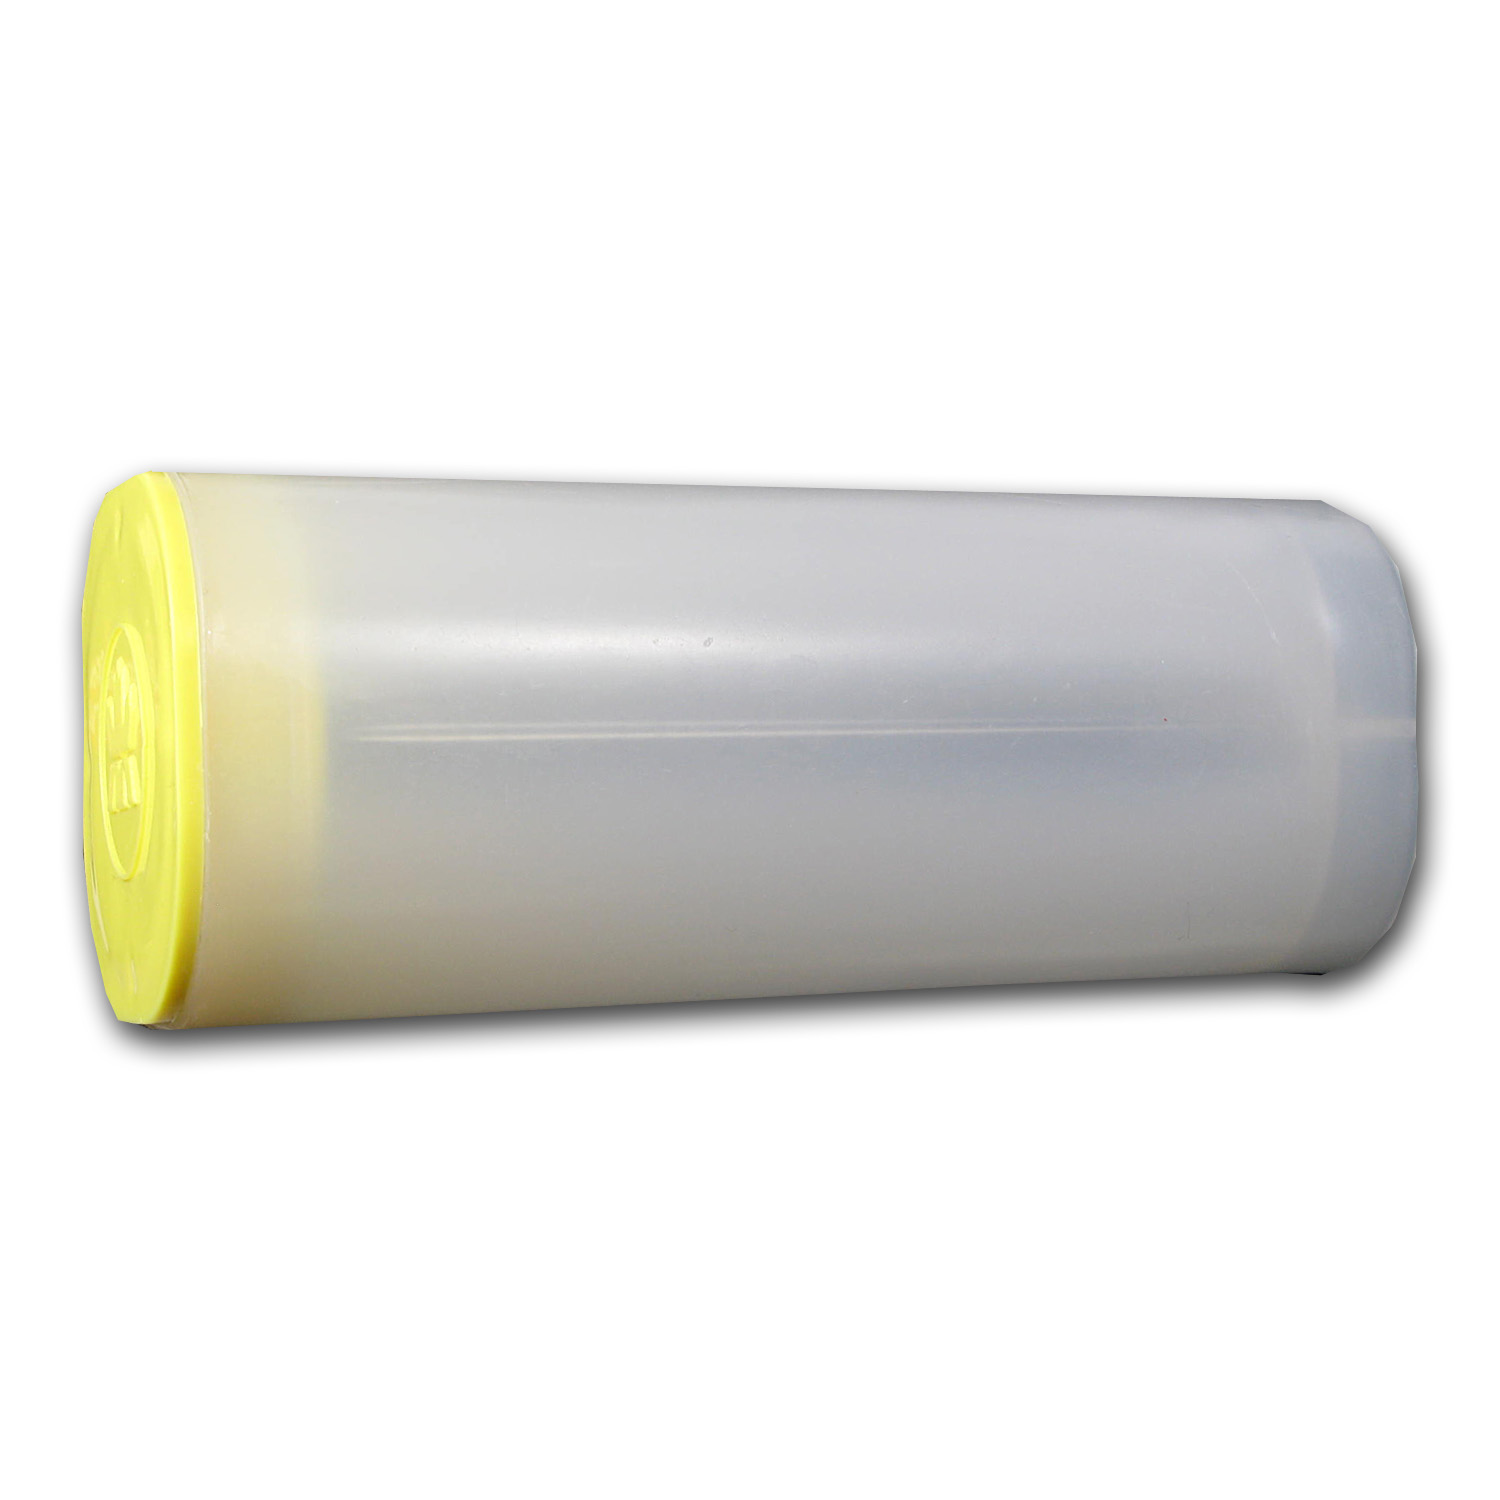 Buy 1 oz RCM Silver Maple Leaf Coin Tubes (Yellow Top)